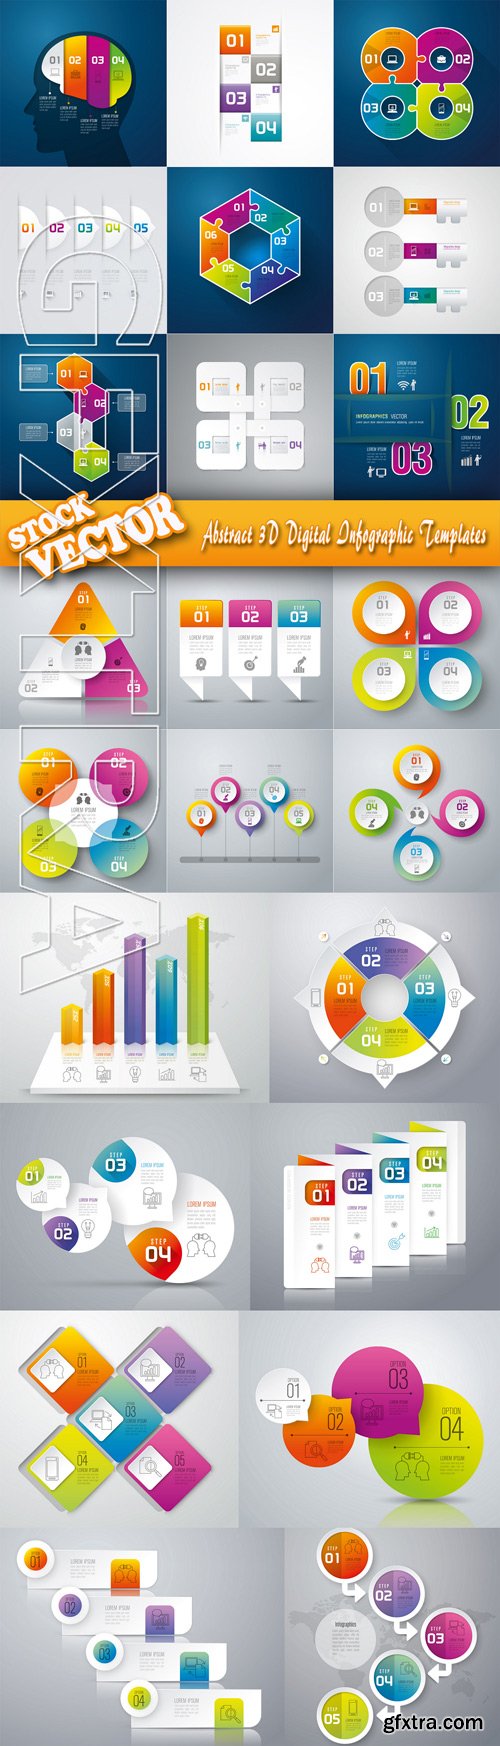 Stock Vector - Abstract 3D Digital Infographic Templates